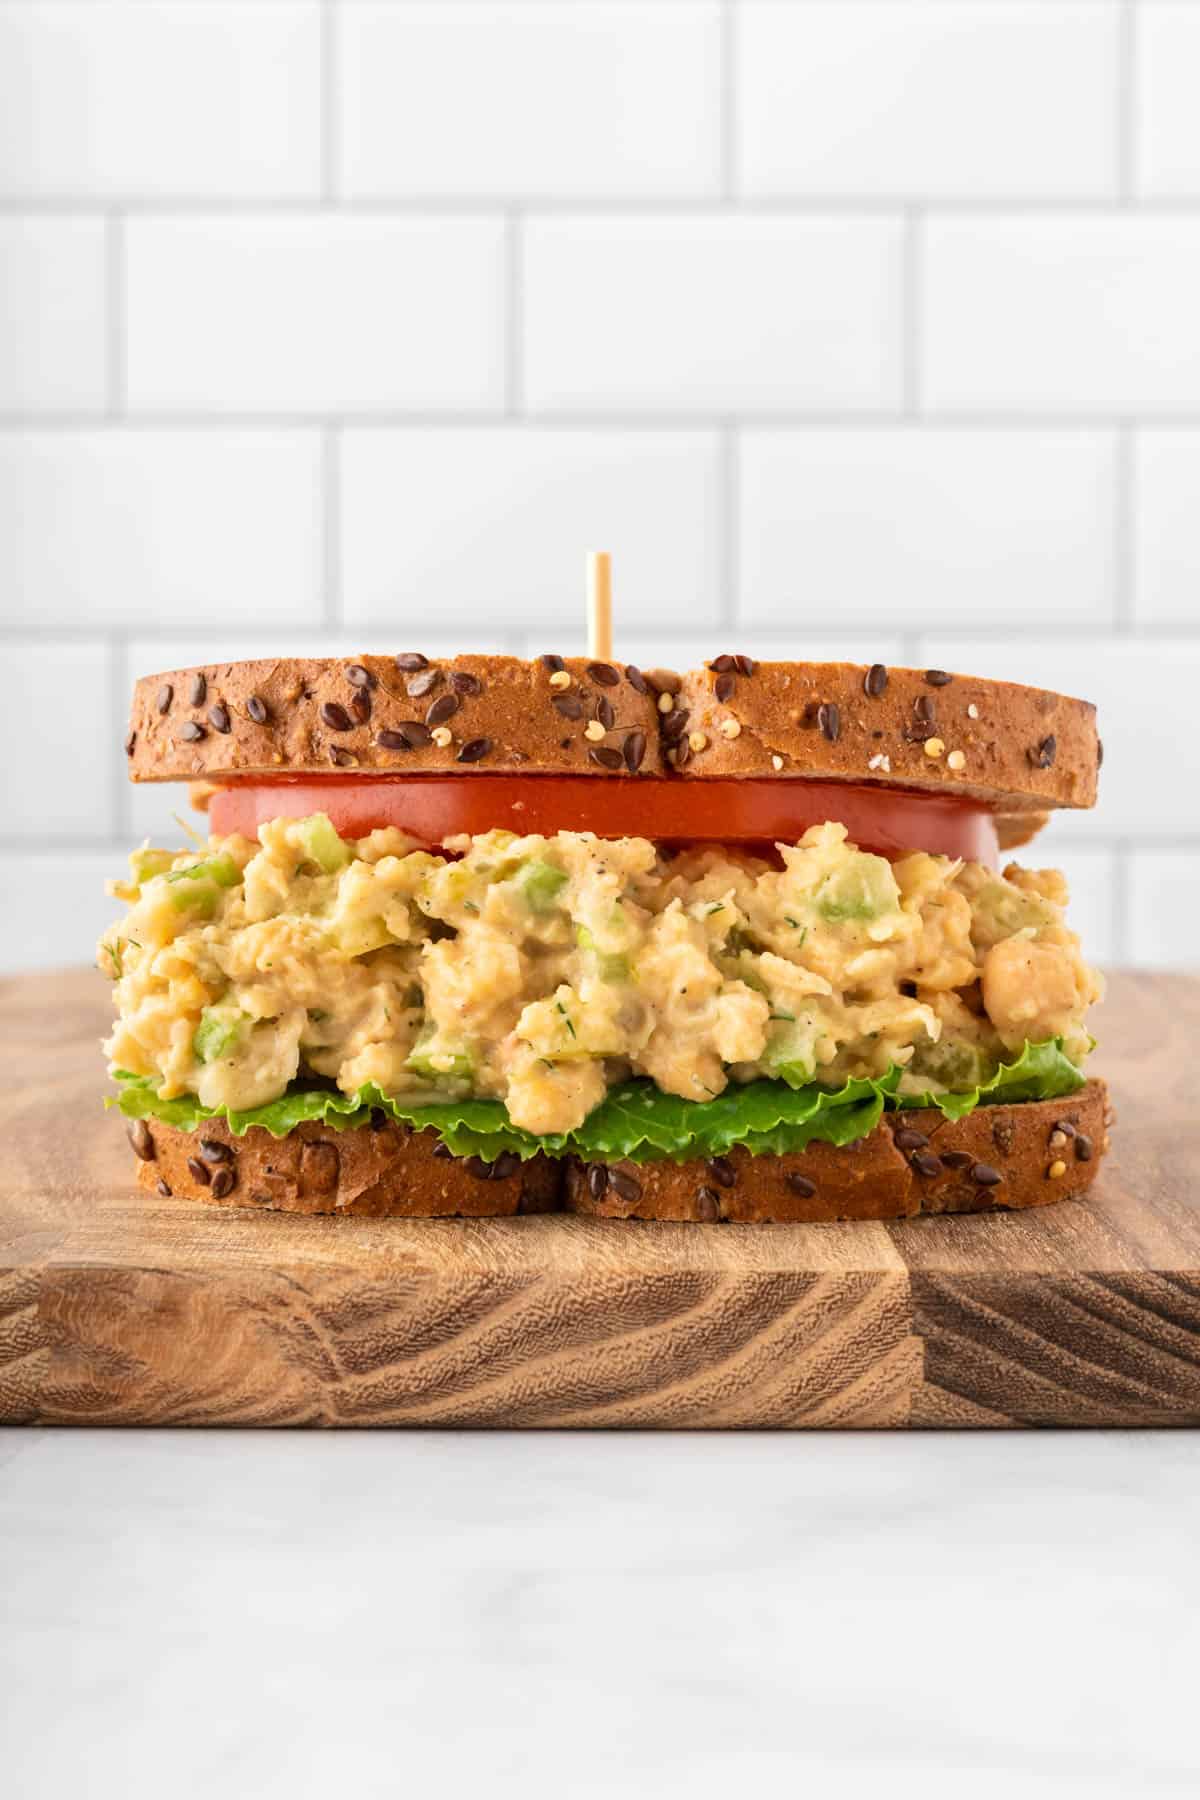 chickpea salad sandwich on bread with tomato and lettuce